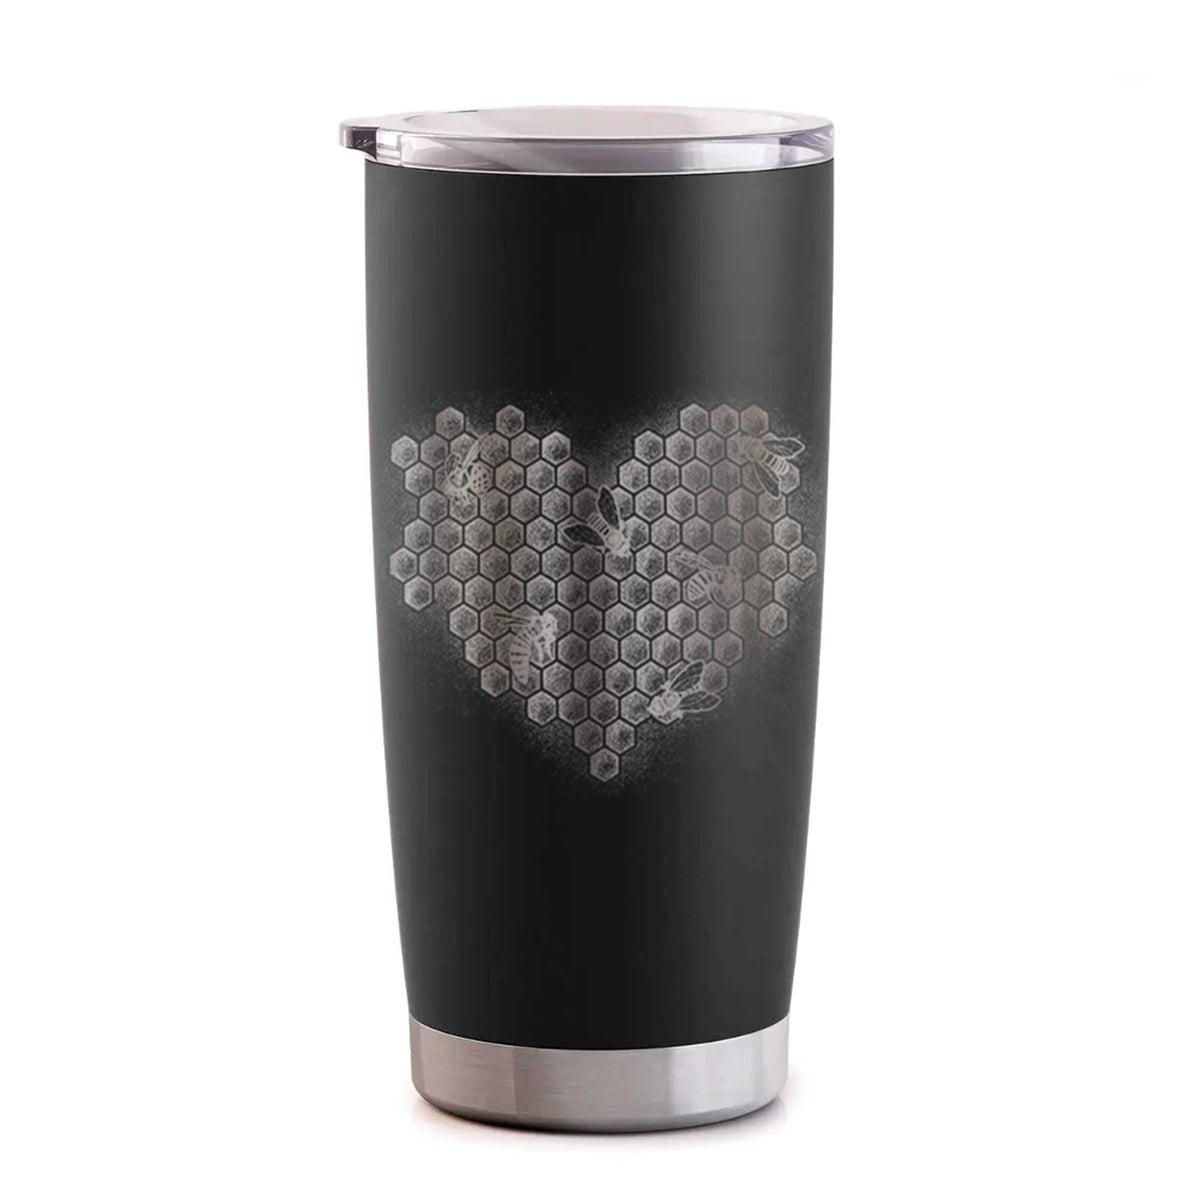 Honeycomb Heart with Bees - 20oz Polar Insulated Tumbler